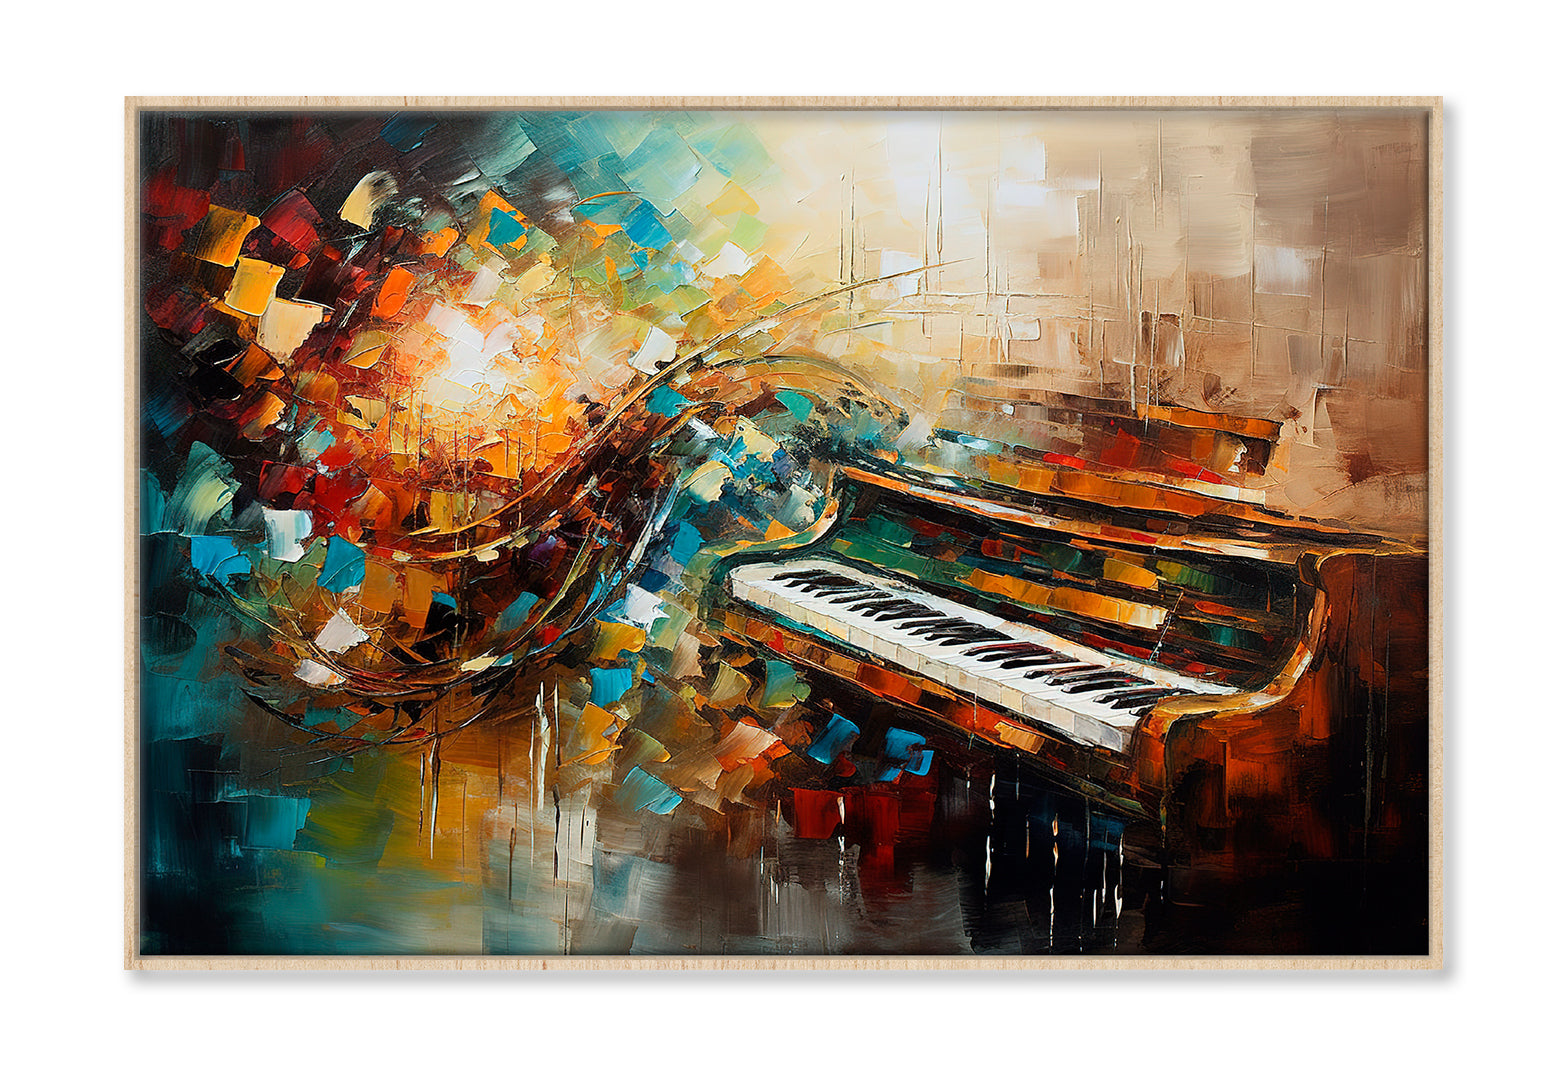 Piano Abstract Musical Oil Painting Wall Art Limited Edition High Quality Print Canvas Box Framed Natural